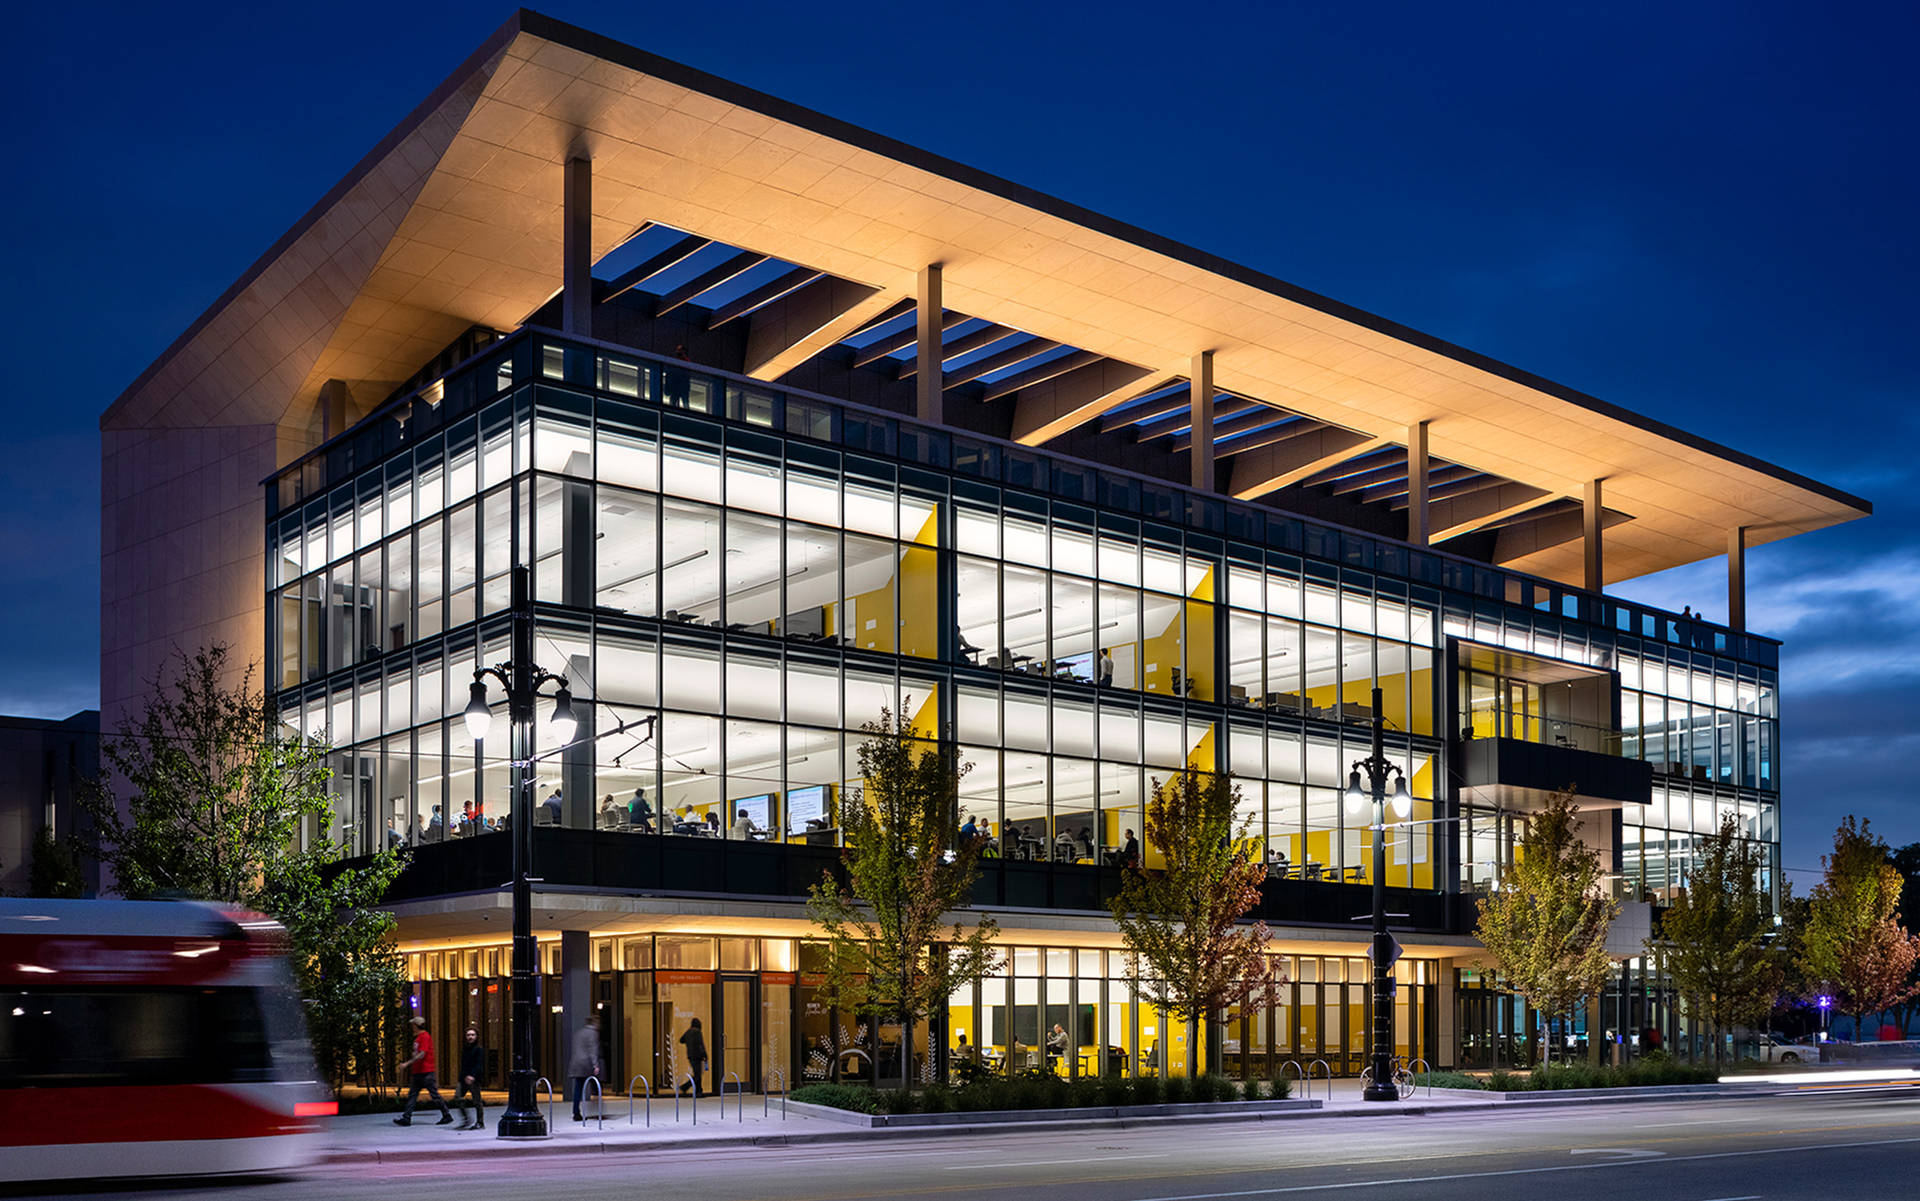 Wayne State University's Mike Ilitch School of Business at dusk. Wallpaper